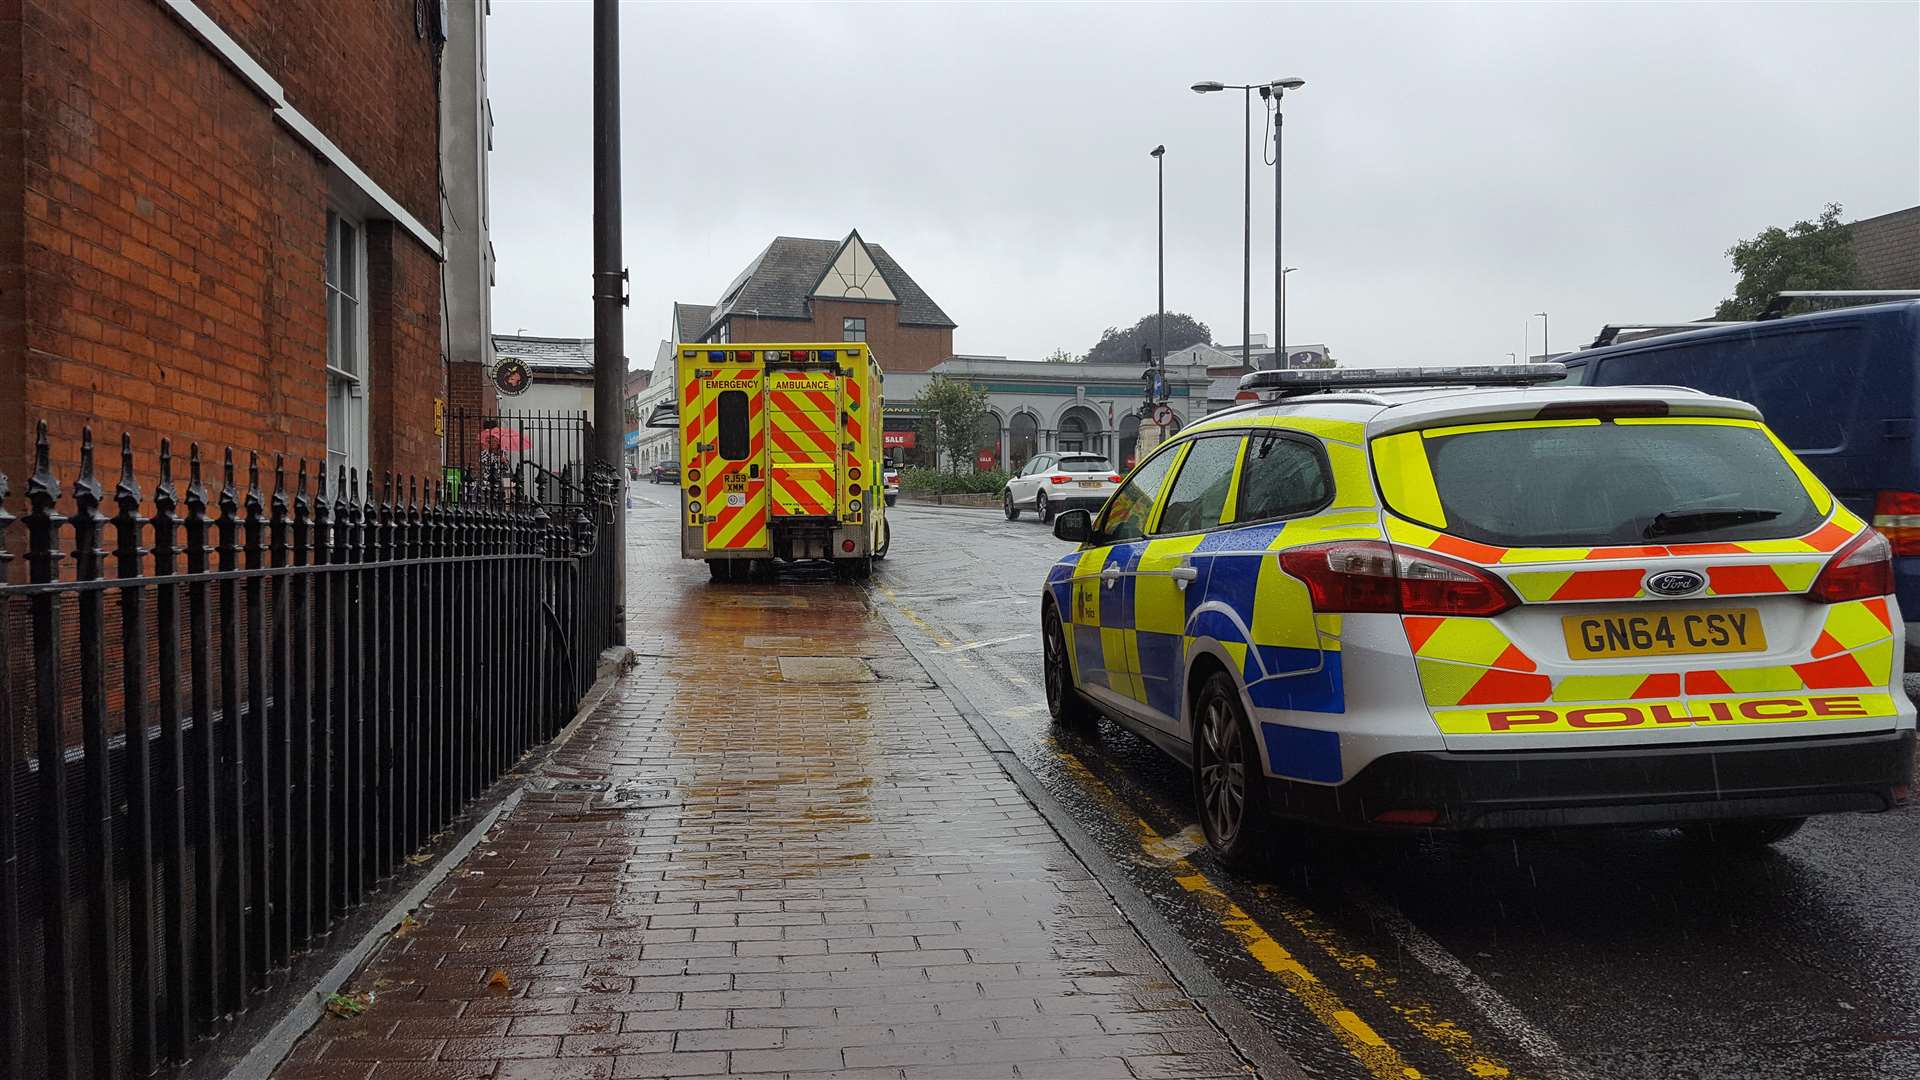 Police and ambulance crews spotted at Broadway, Maidstone